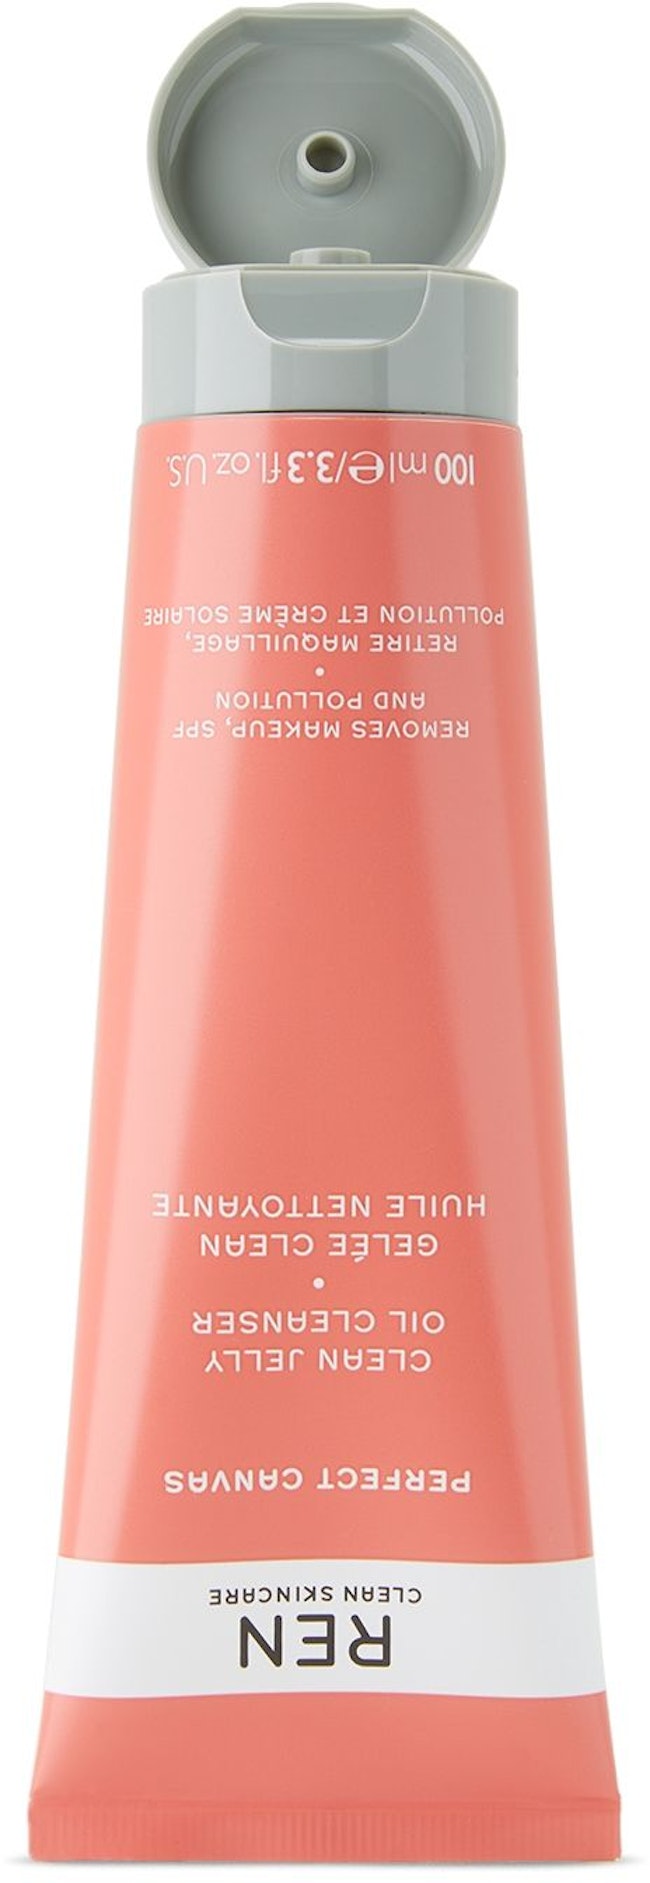 Perfect Canvas Clean Jelly Oil Cleanser, 100 mL: additional image